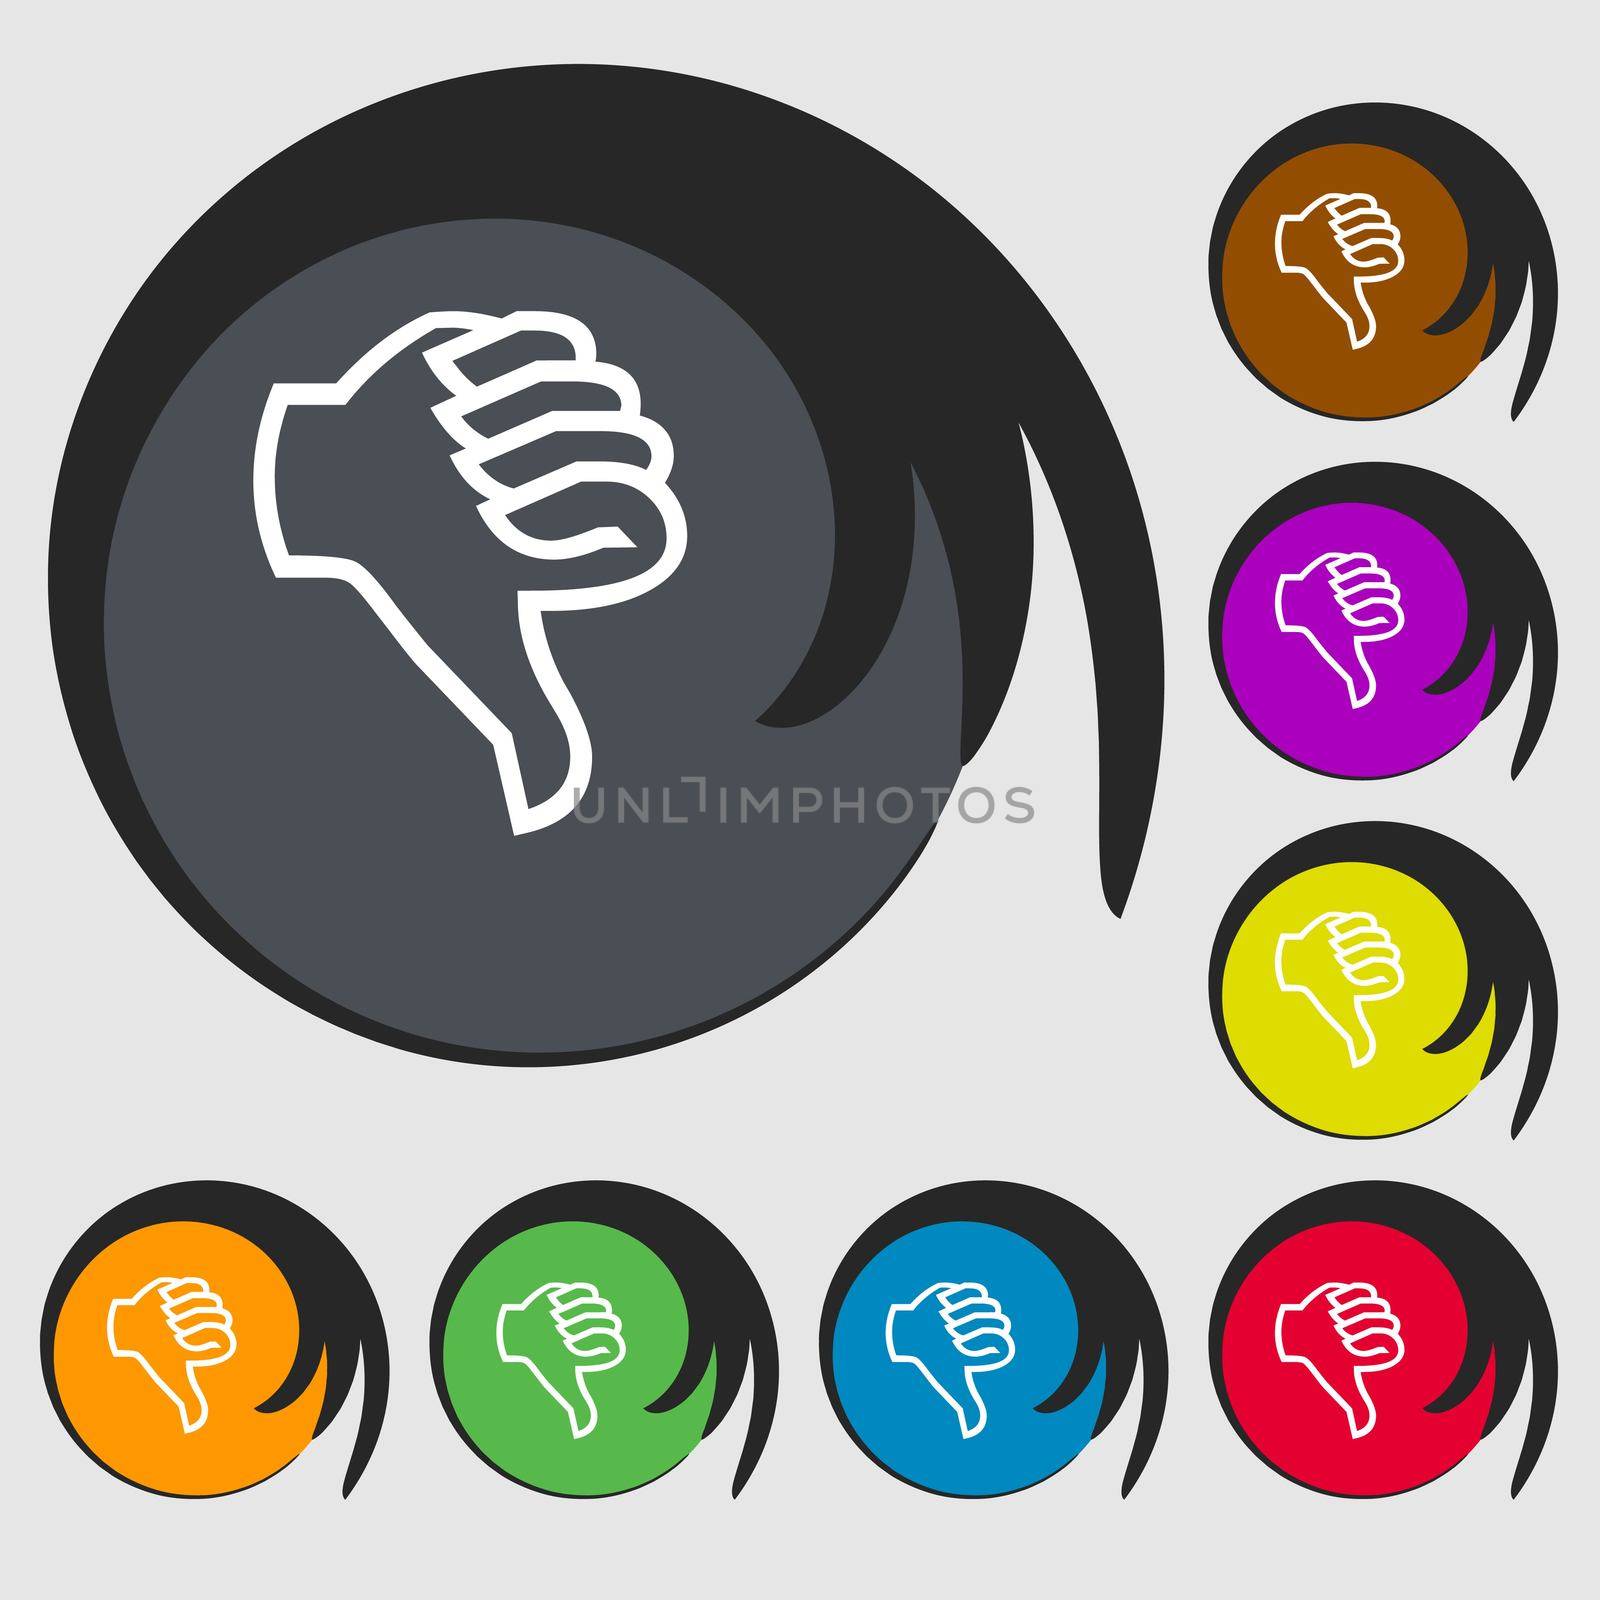 Dislike sign icon. Thumb down sign. Hand finger down symbol. Symbols on eight colored buttons. illustration